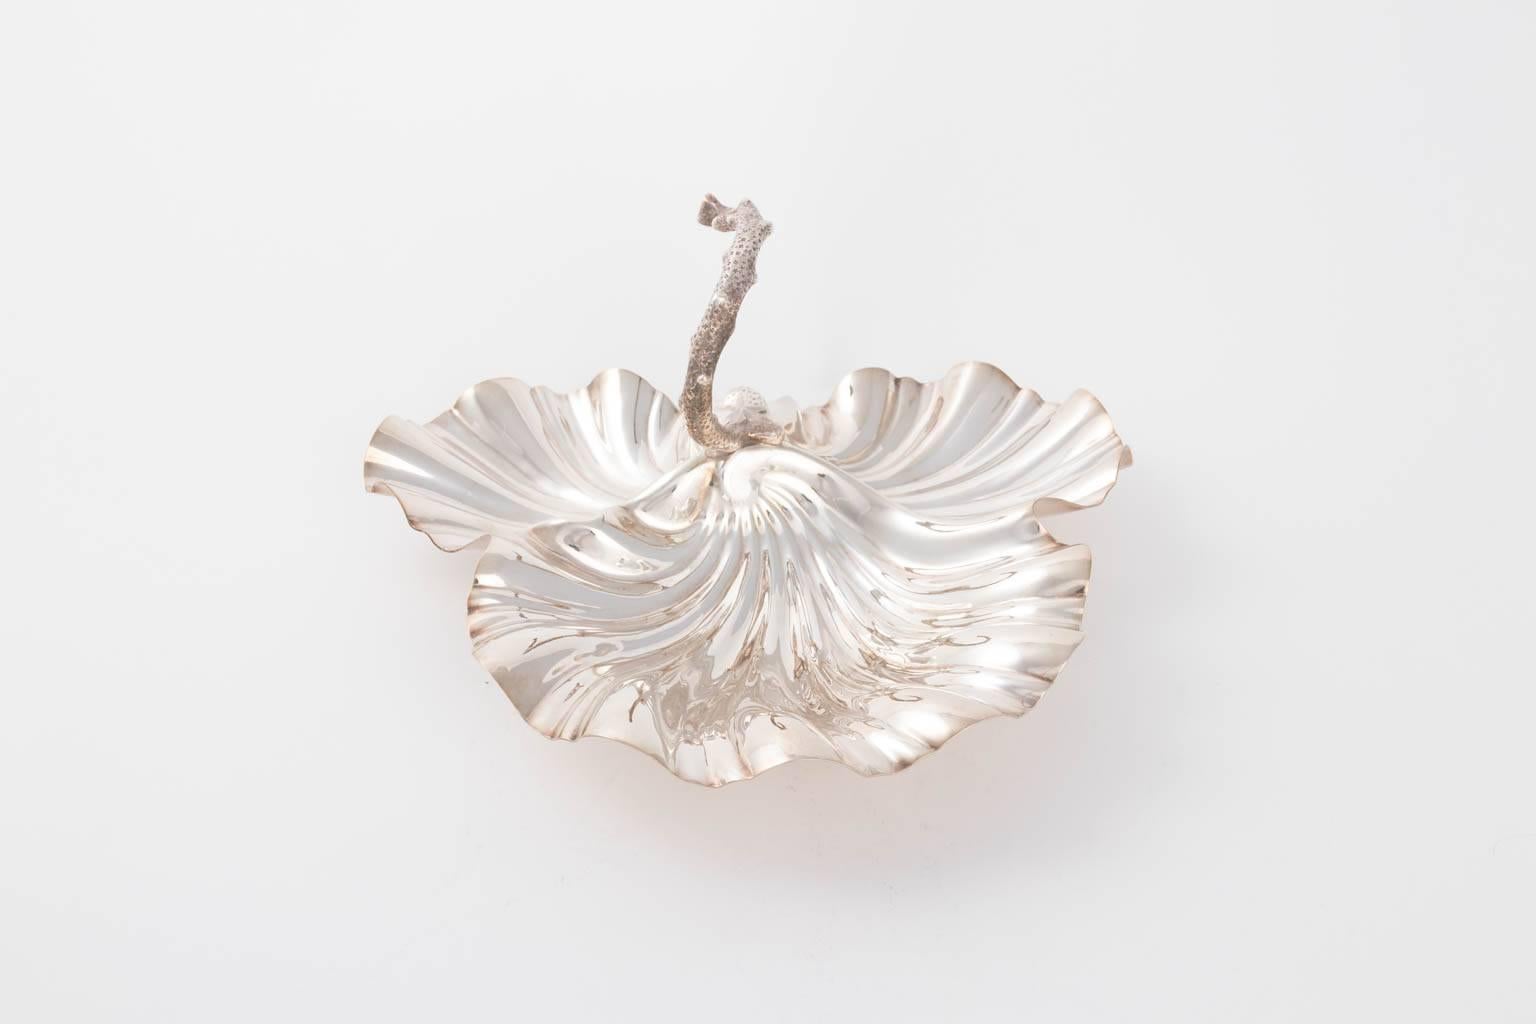 Scallop Shell Silver Plated Serving Dish 4